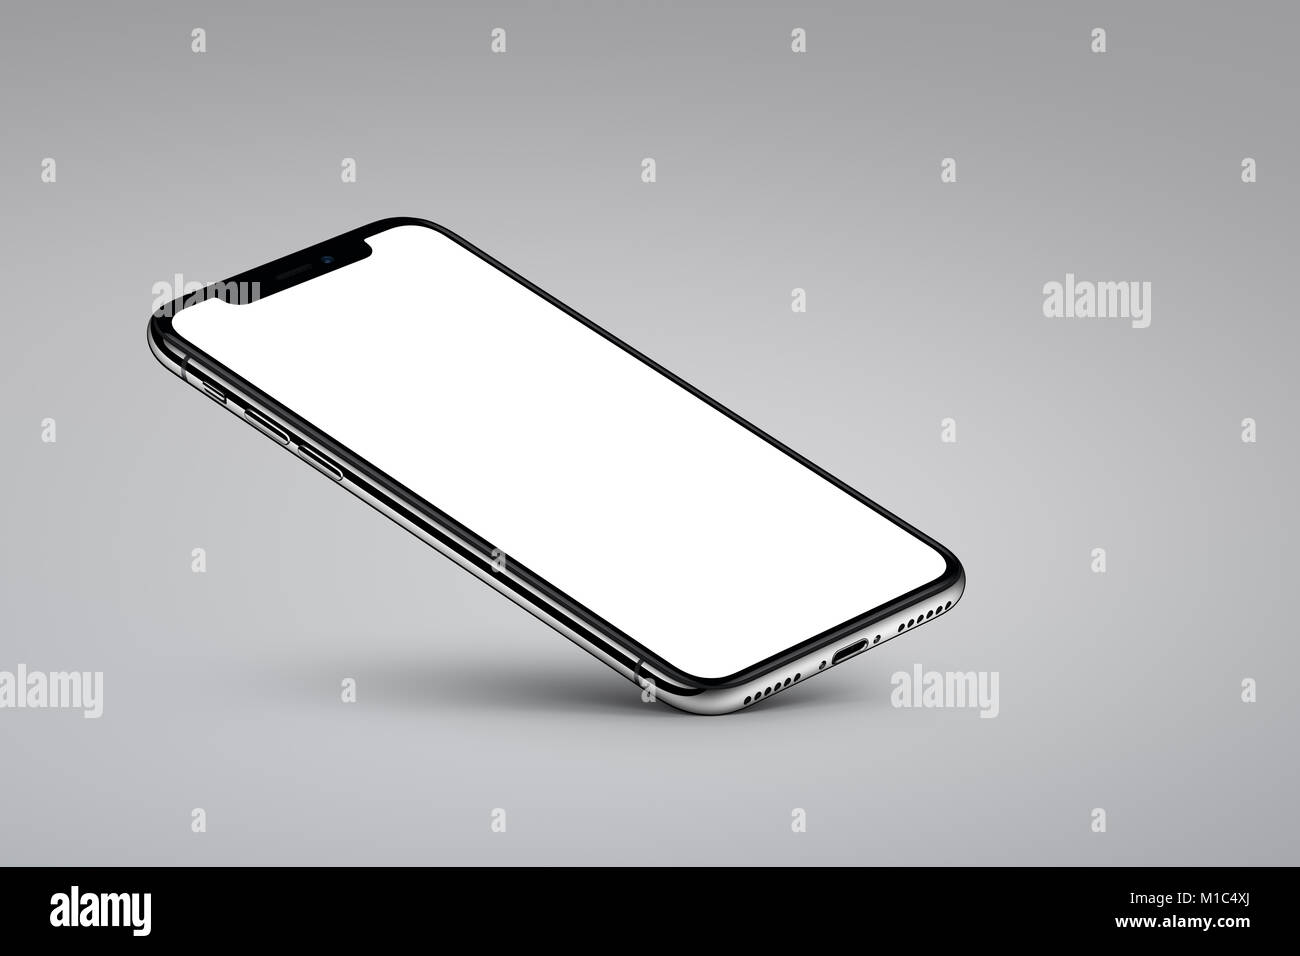 iPhone X. Perspective veiw smartphone mockup rests on one corner on gray background. Stock Photo